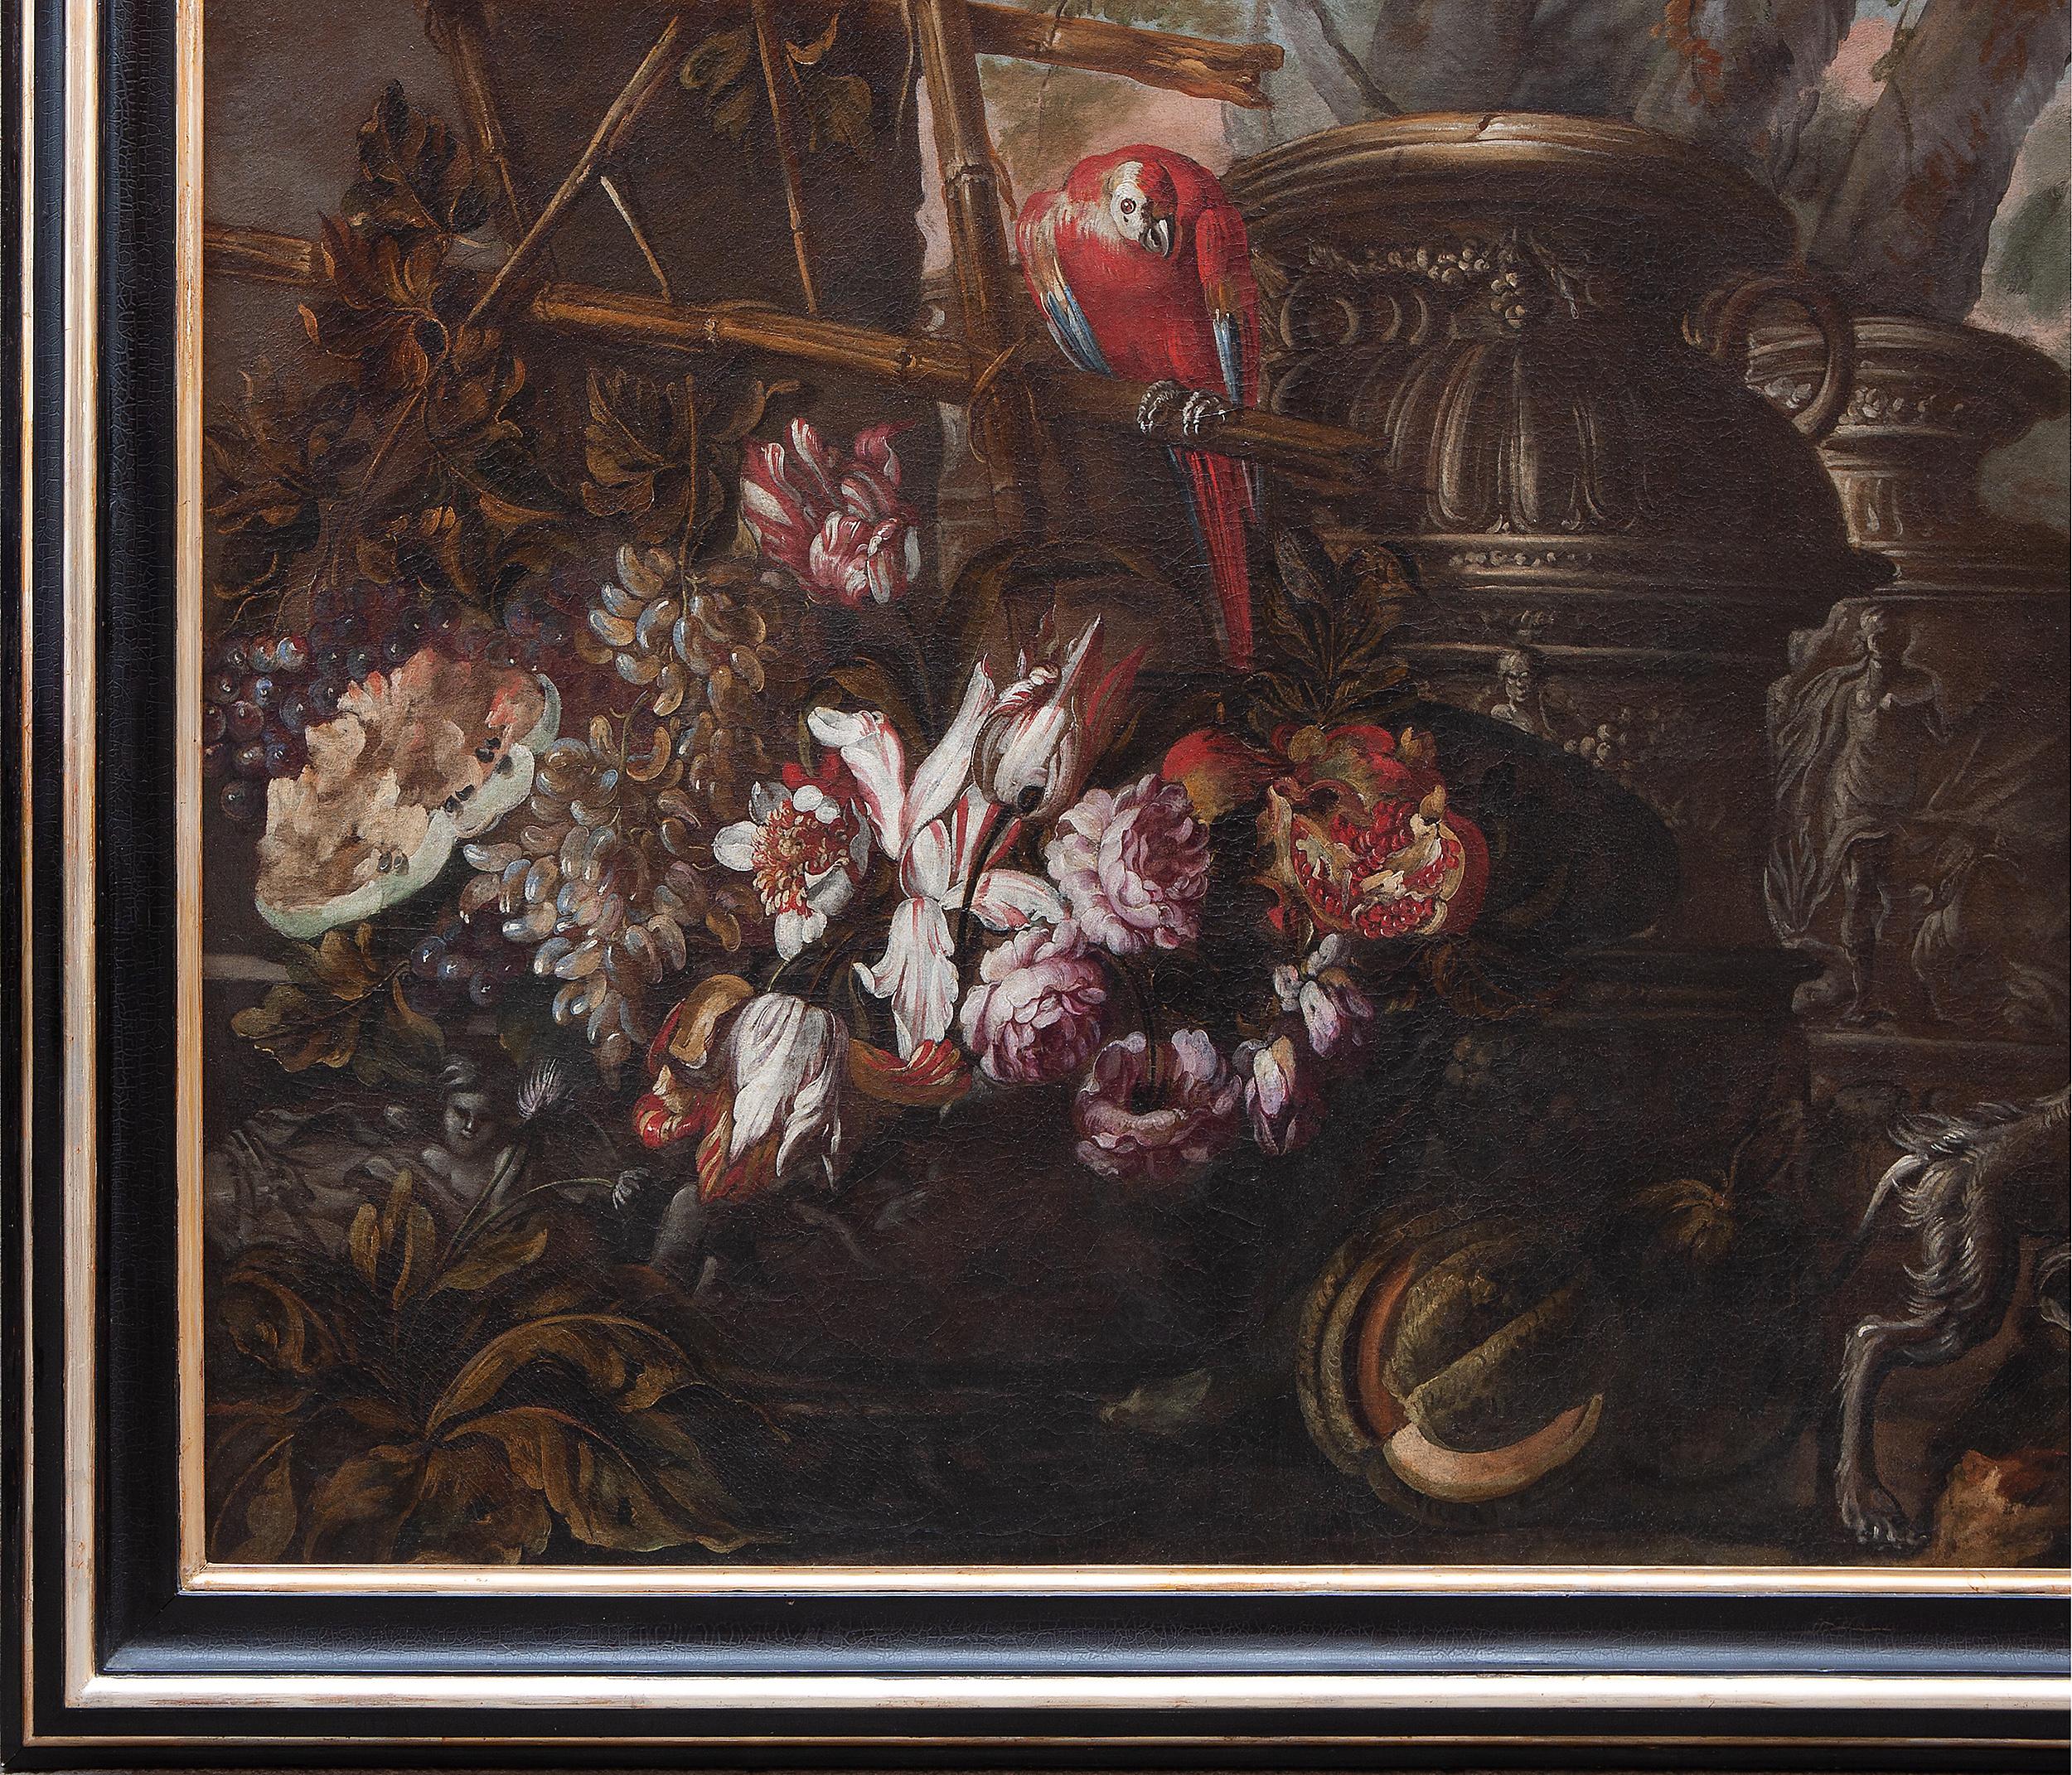 Still life with flowers, fruits, historiated vases, a parrot and a monkey  - Black Still-Life Painting by Unknown